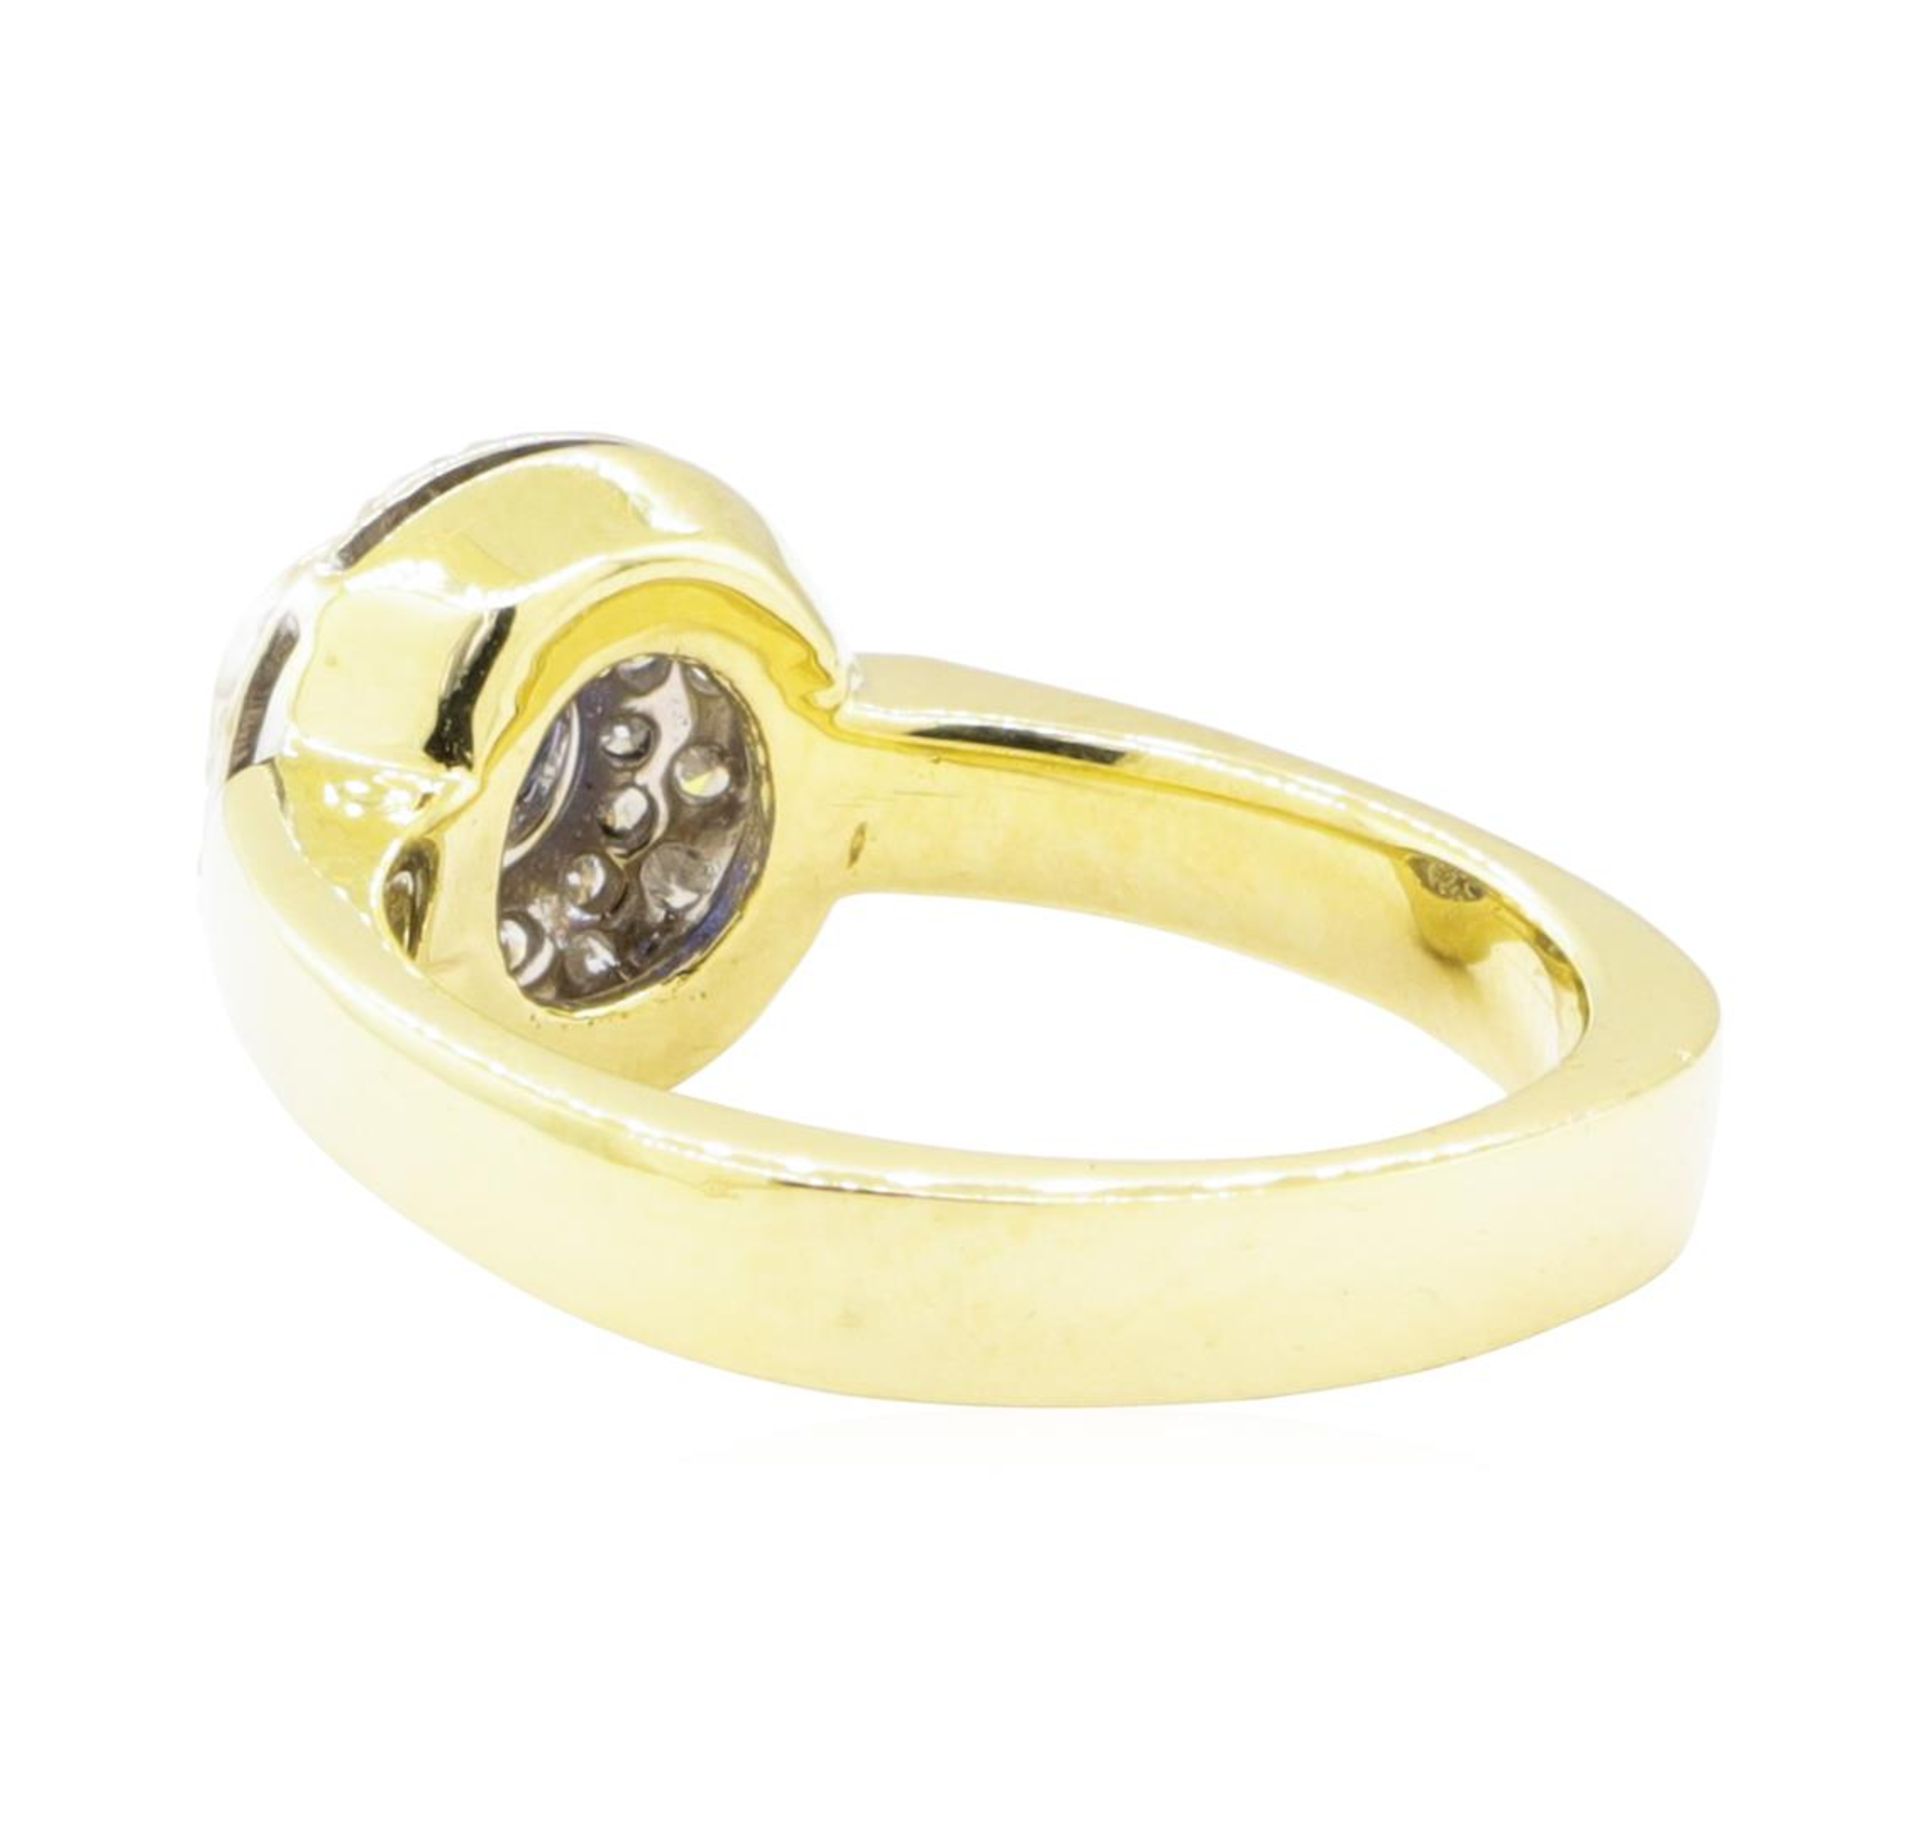 1.02 ctw Sapphire and Diamond Ring - 18KT Yellow Gold - Image 3 of 4